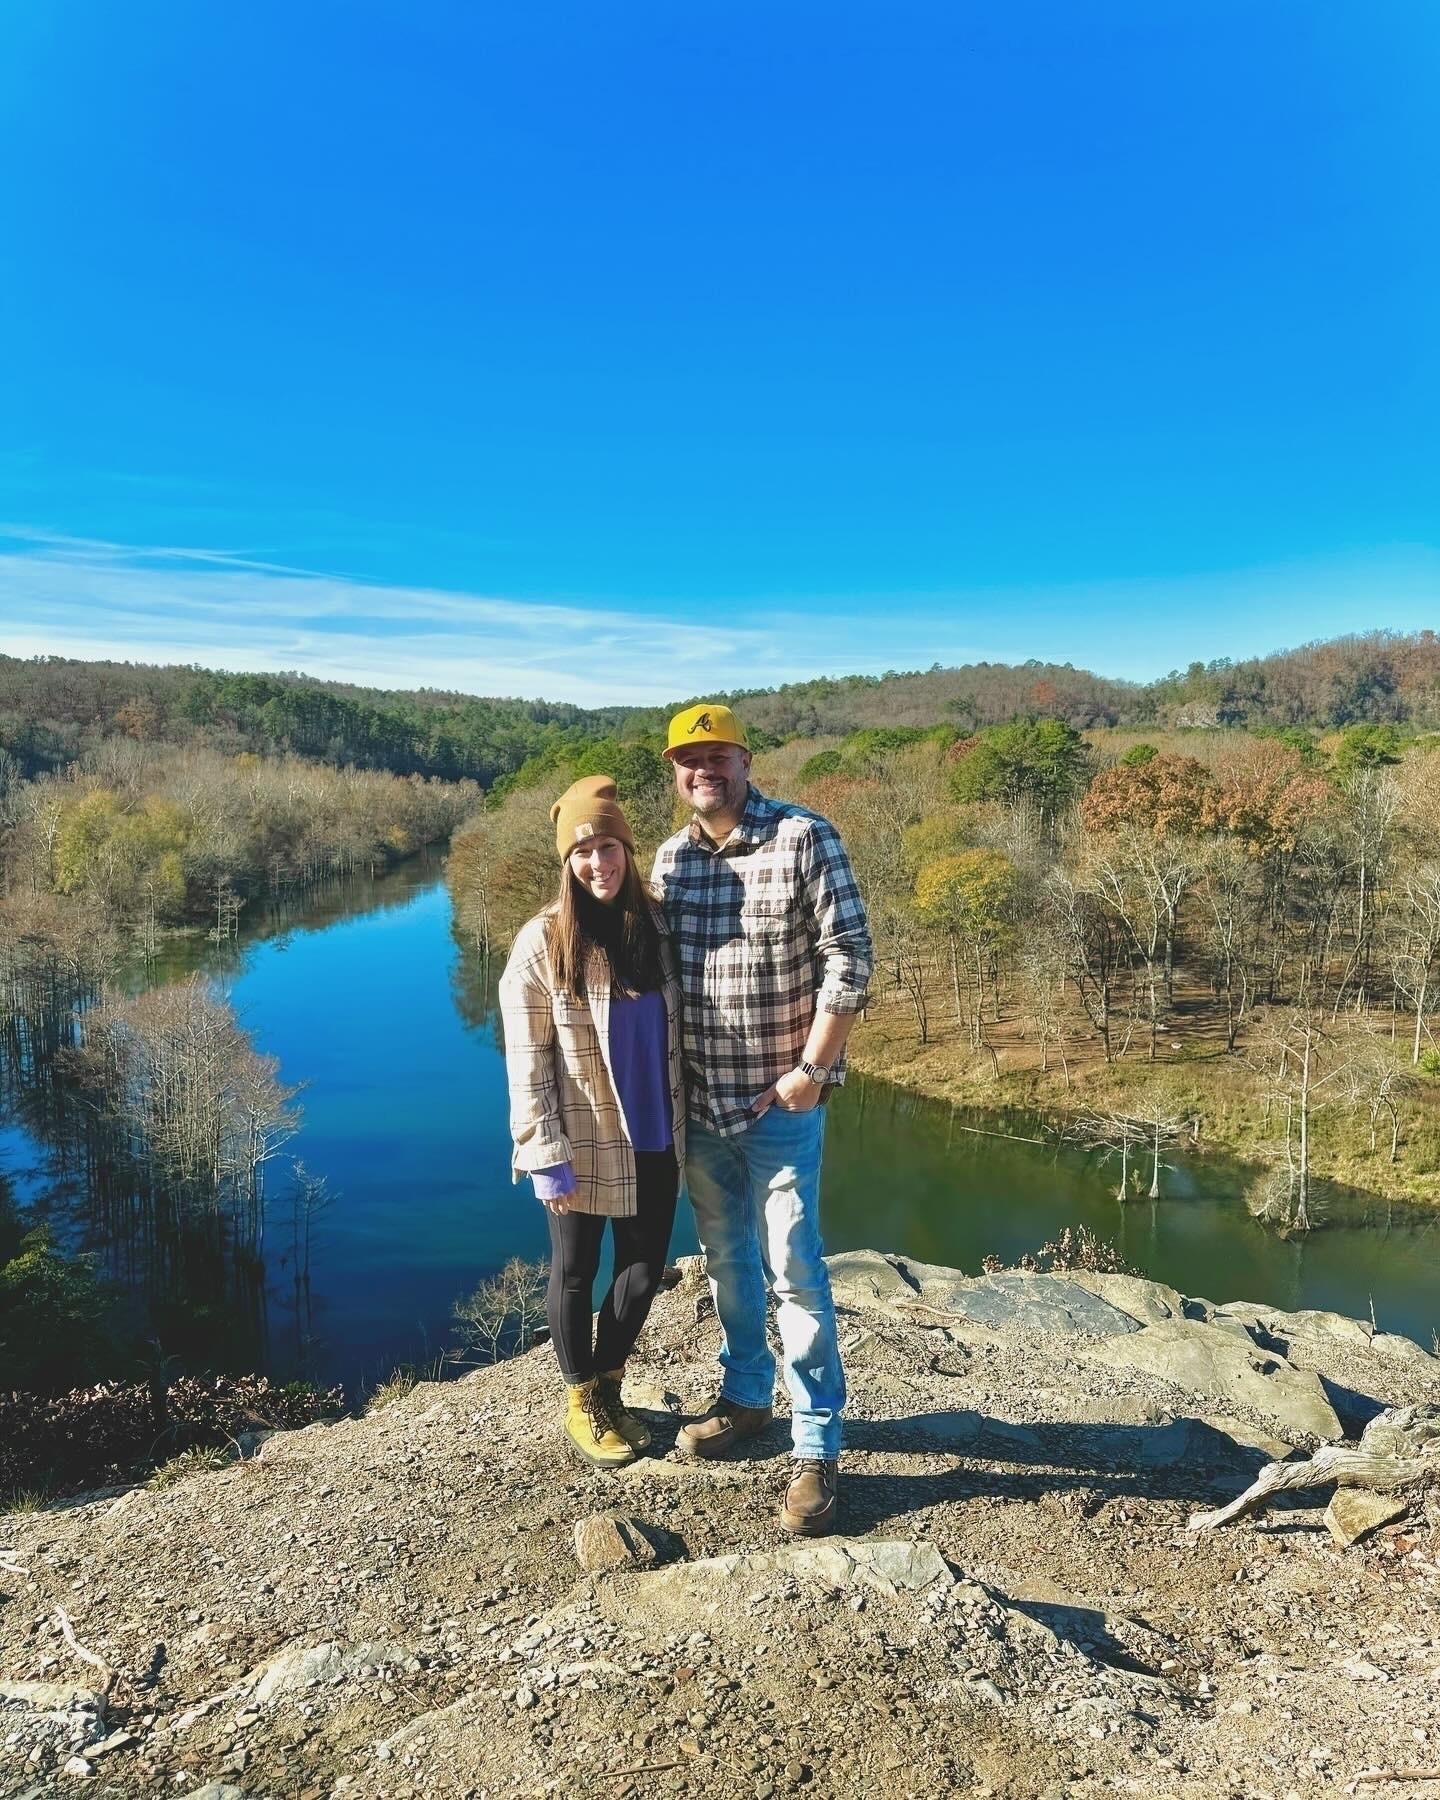 A man and woman in casual outdoor attire are standing on a rocky ledge overlooking a scenic landscape with a river and forested area.